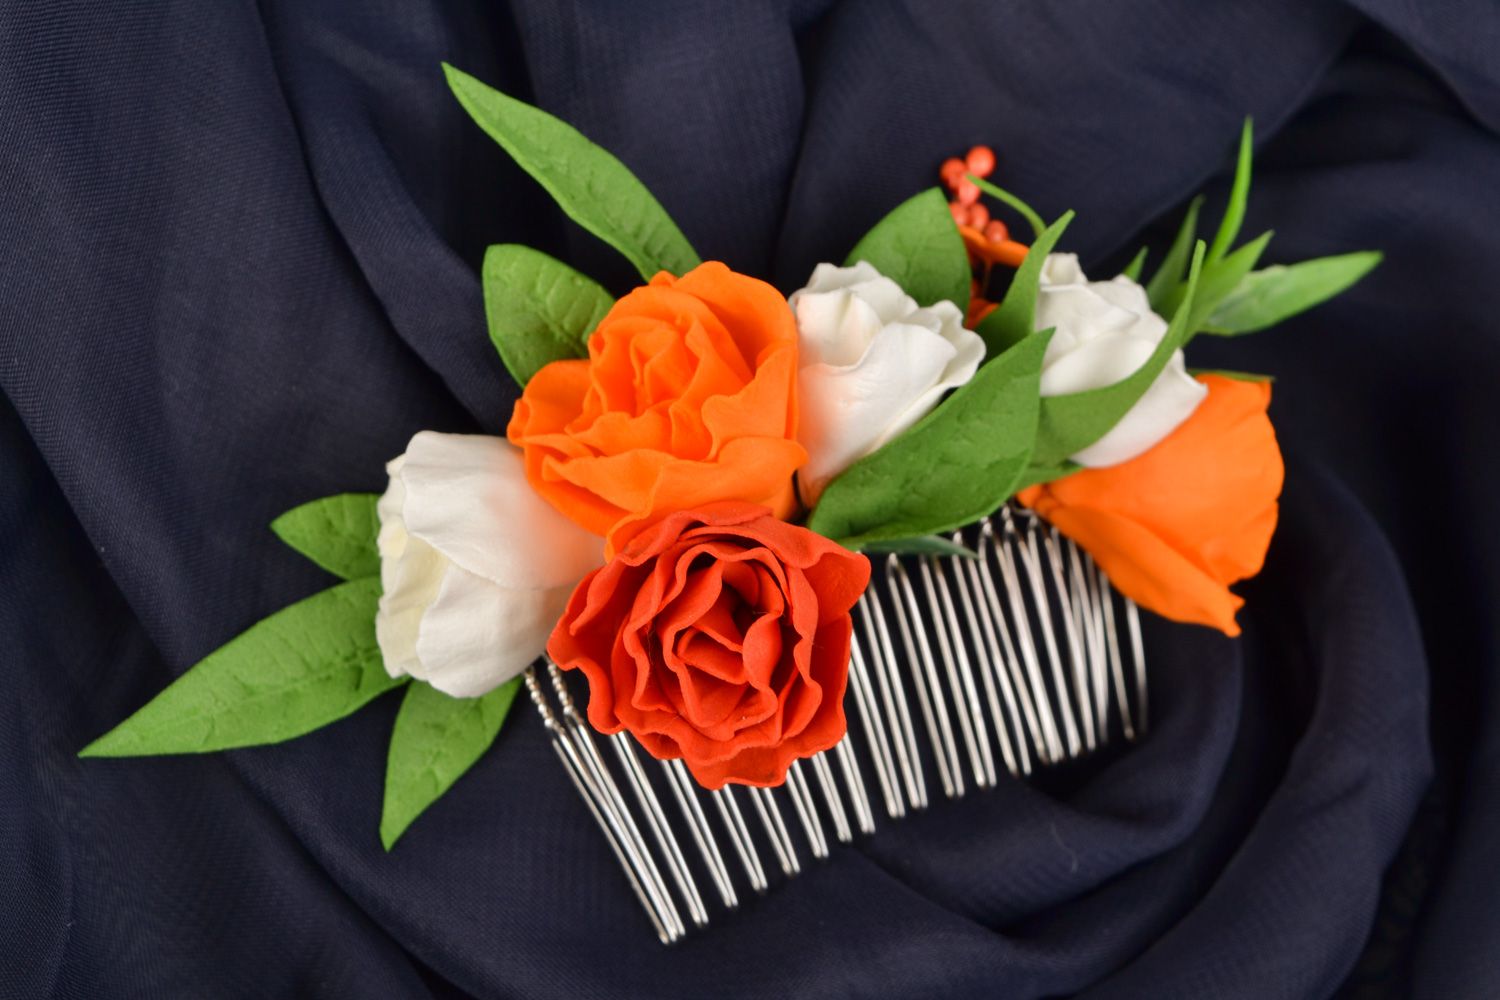 Handmade hair comb designer hair comb with flowers wedding accessory gift ideas photo 5